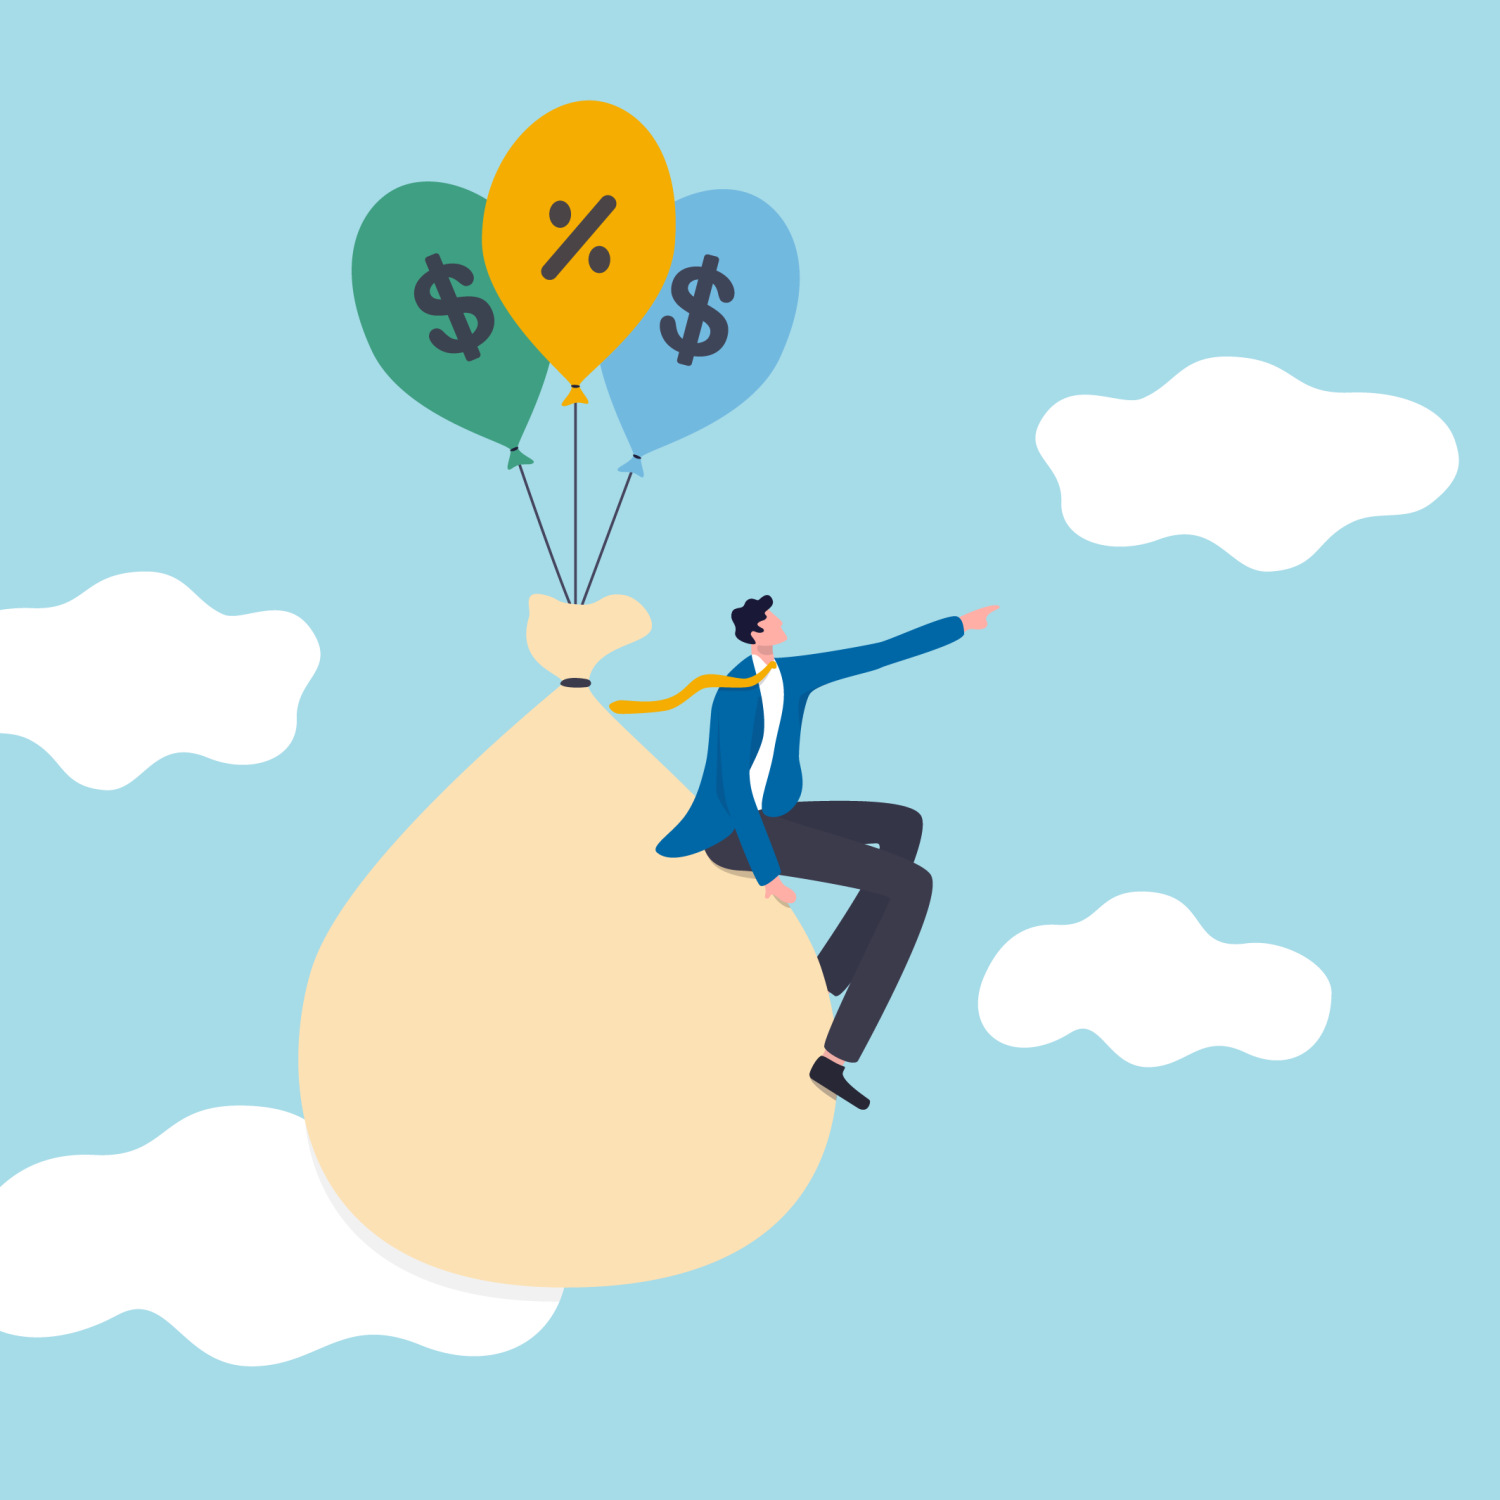 graphic of a businessperson on bag of balloons with dollar & division symbols flying across a blue sky